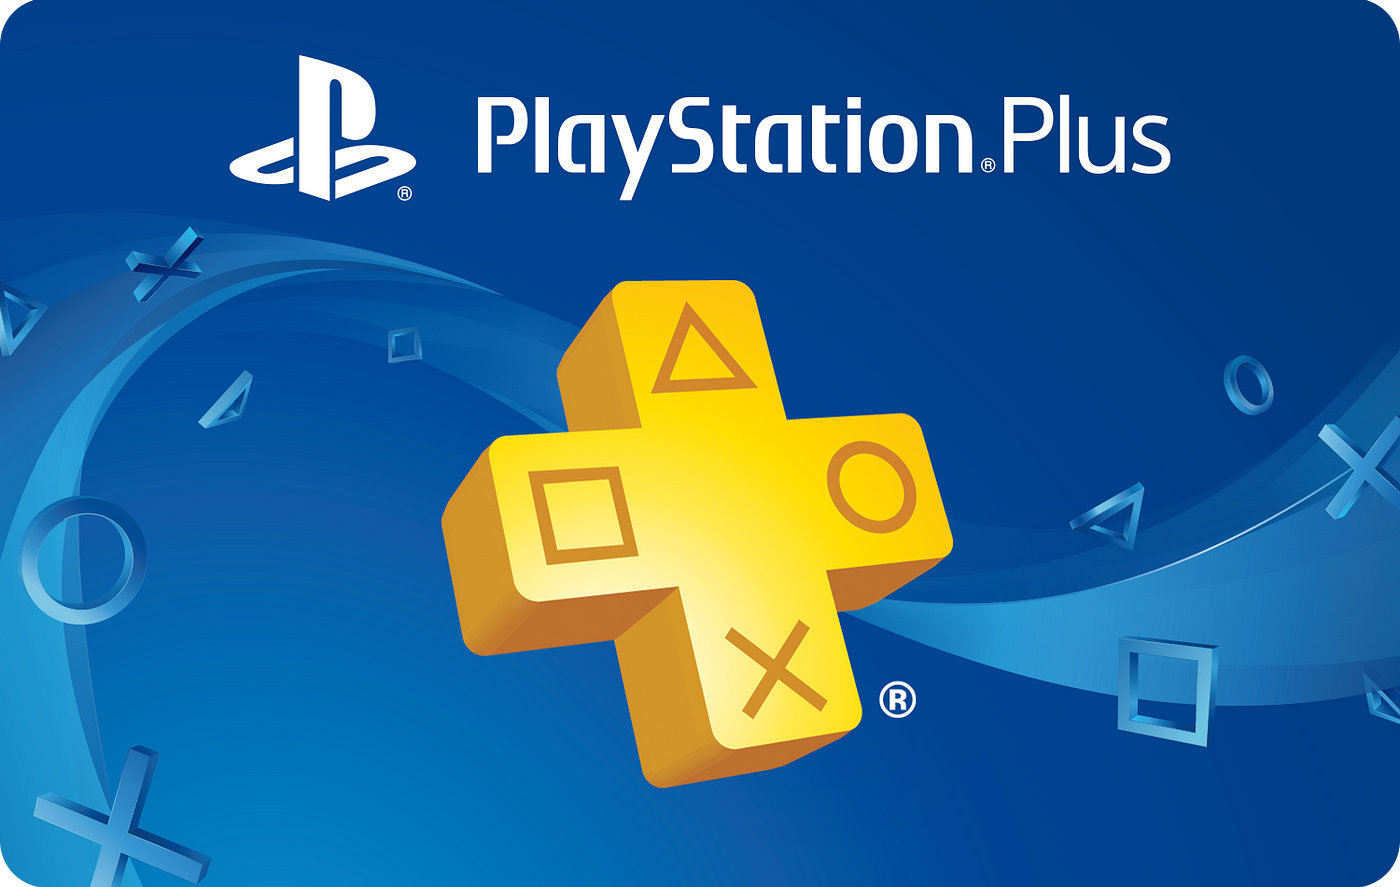 PS+ allows for only 1,000 saves. When your storage limit is 100GB, by  Sohrab Osati